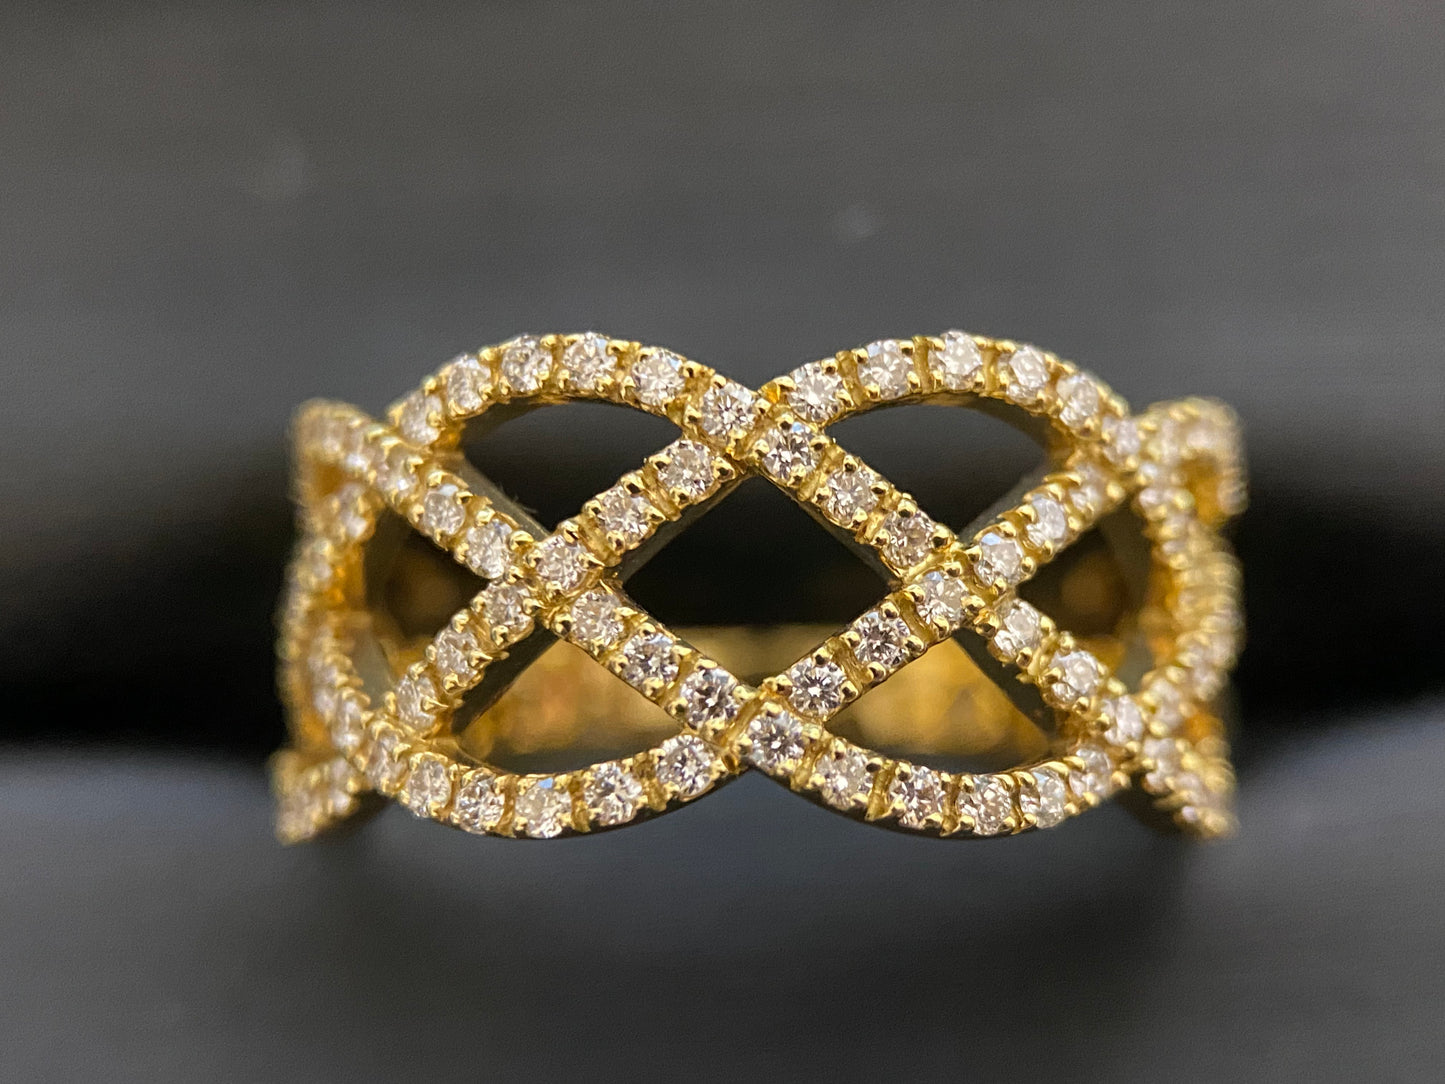 New] Diamond jewelry conceived from cobblestones, luxury ornamental ring.